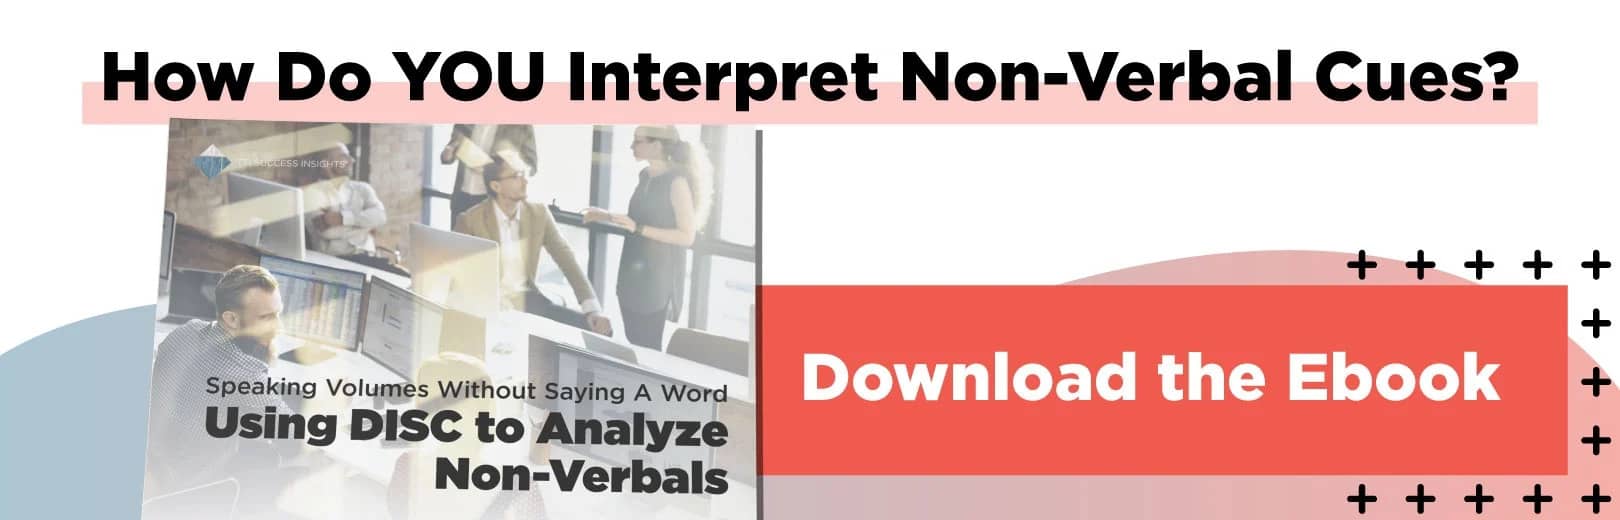 How do you Interpret Non-Verbal Cues? Download the Ebook